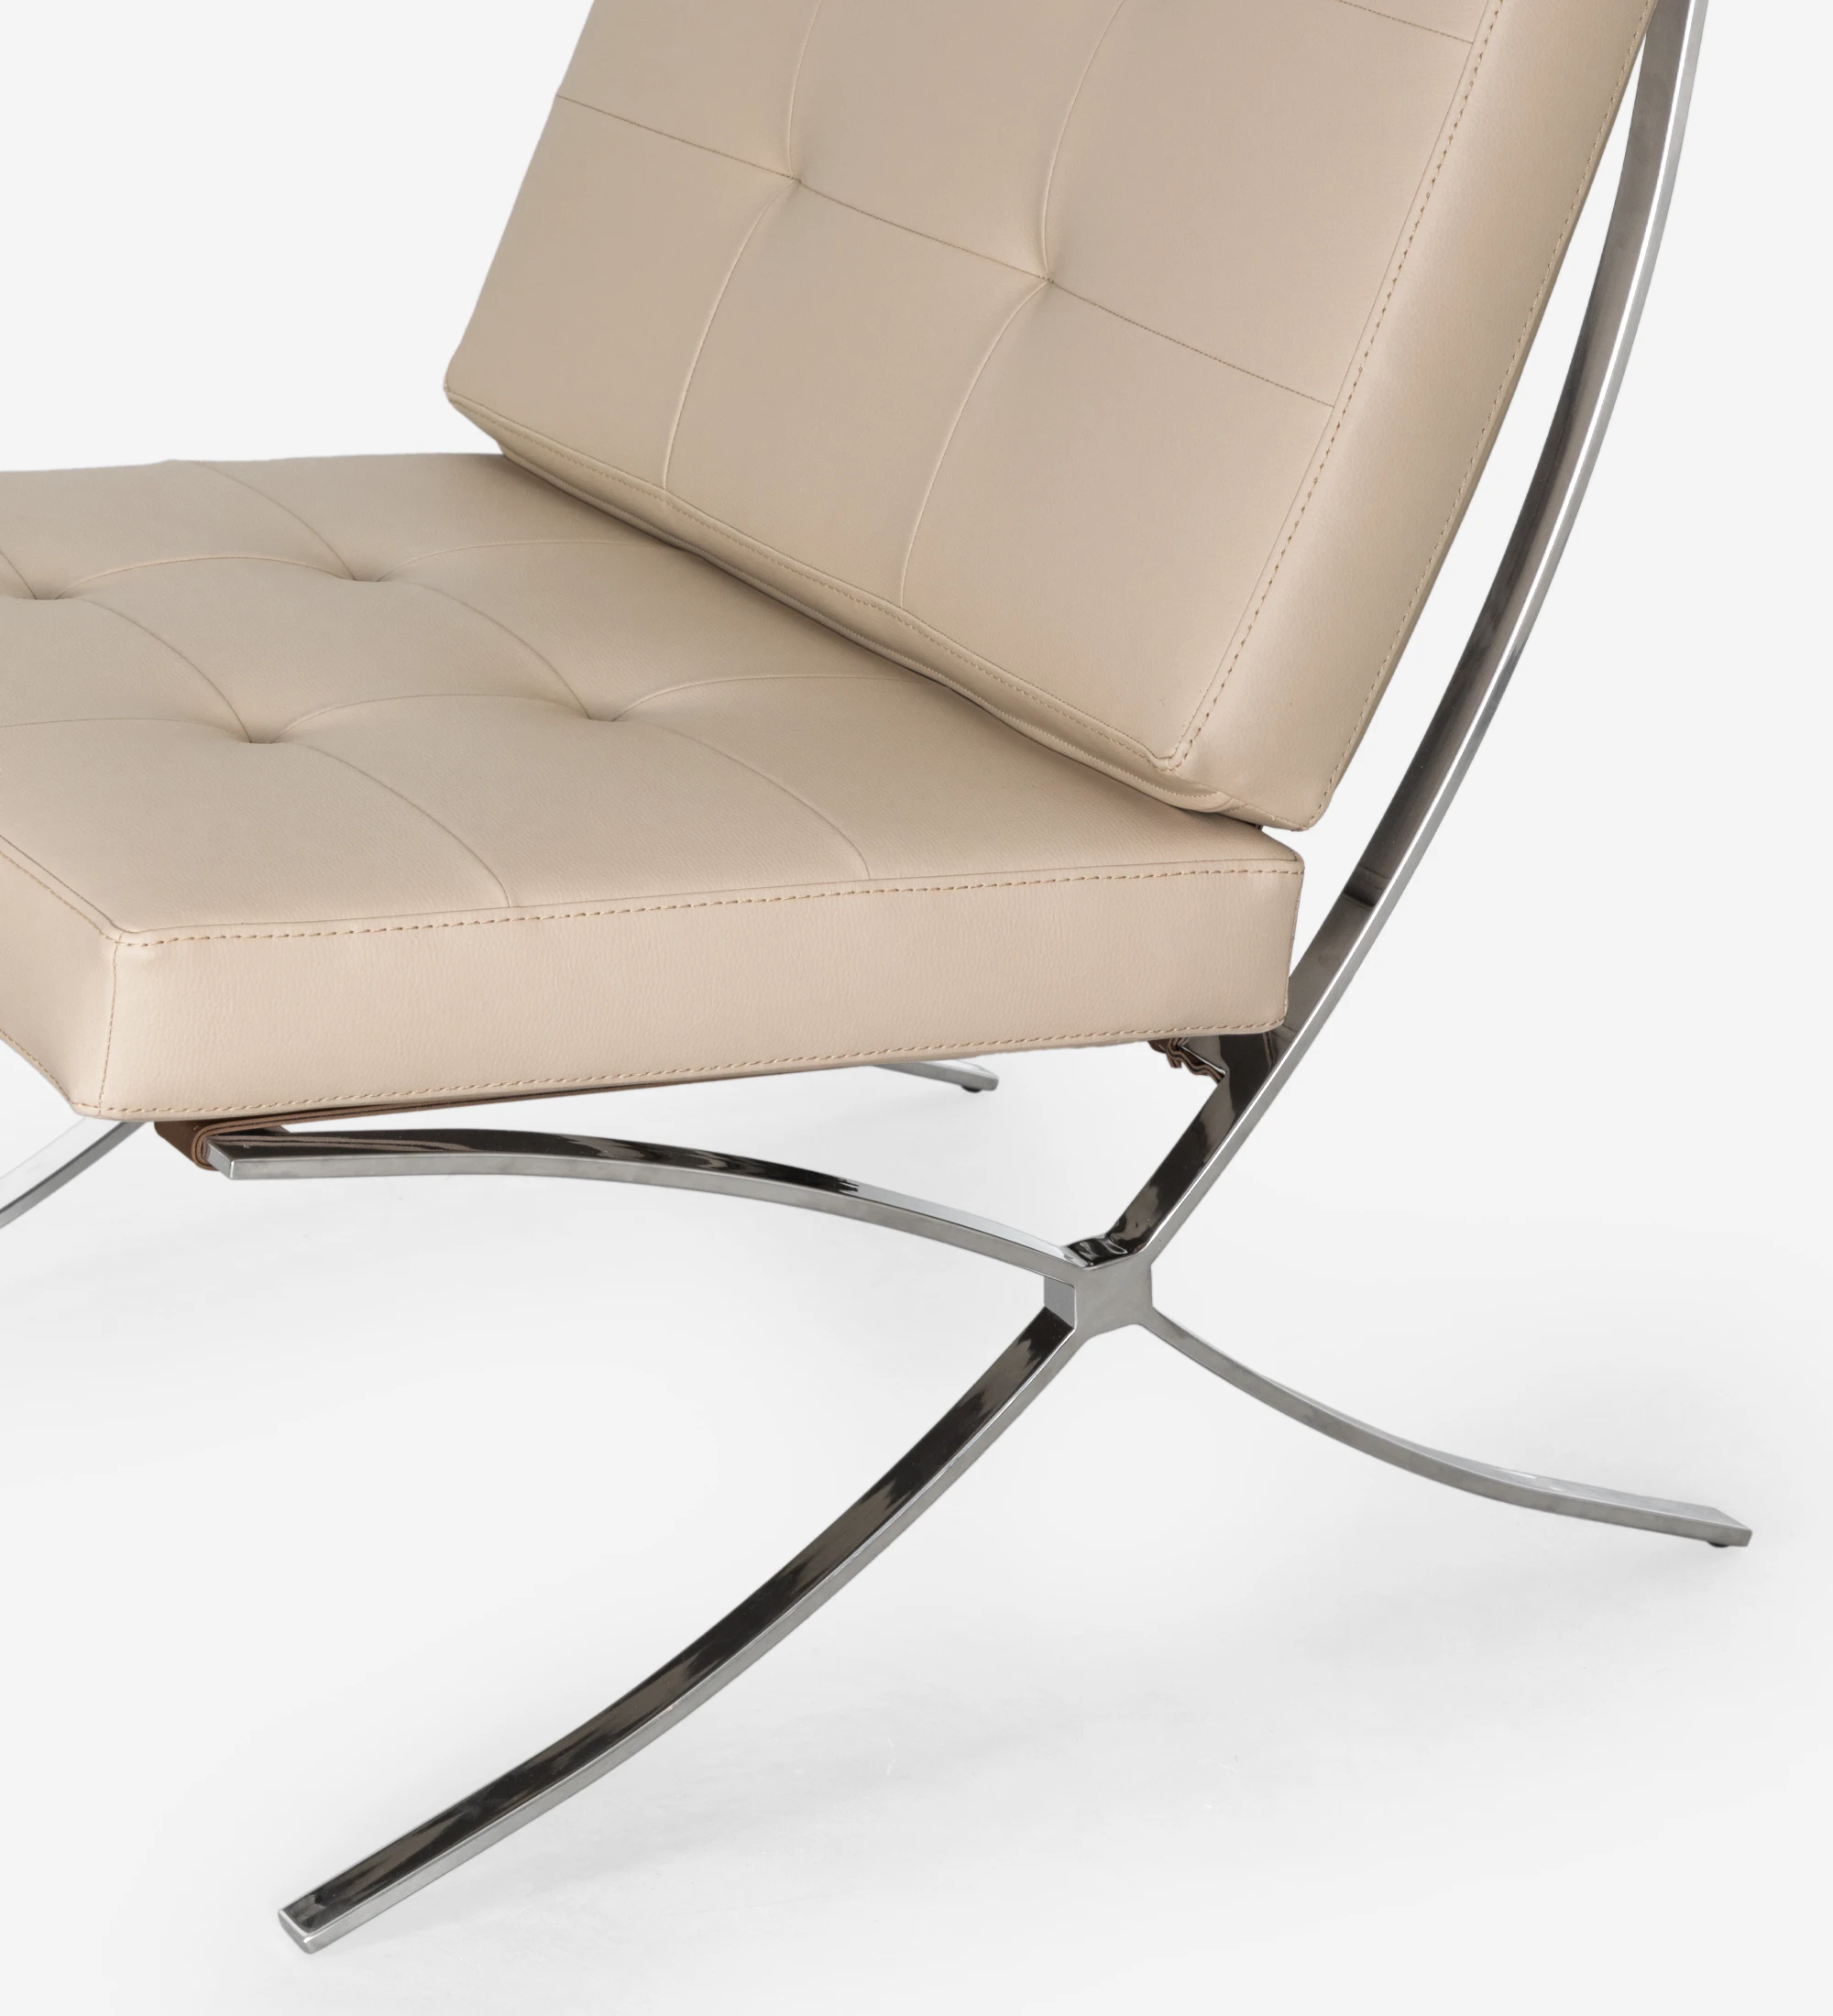 Barcelona armchair upholstered in beige eco-leather, stainless steel feet.